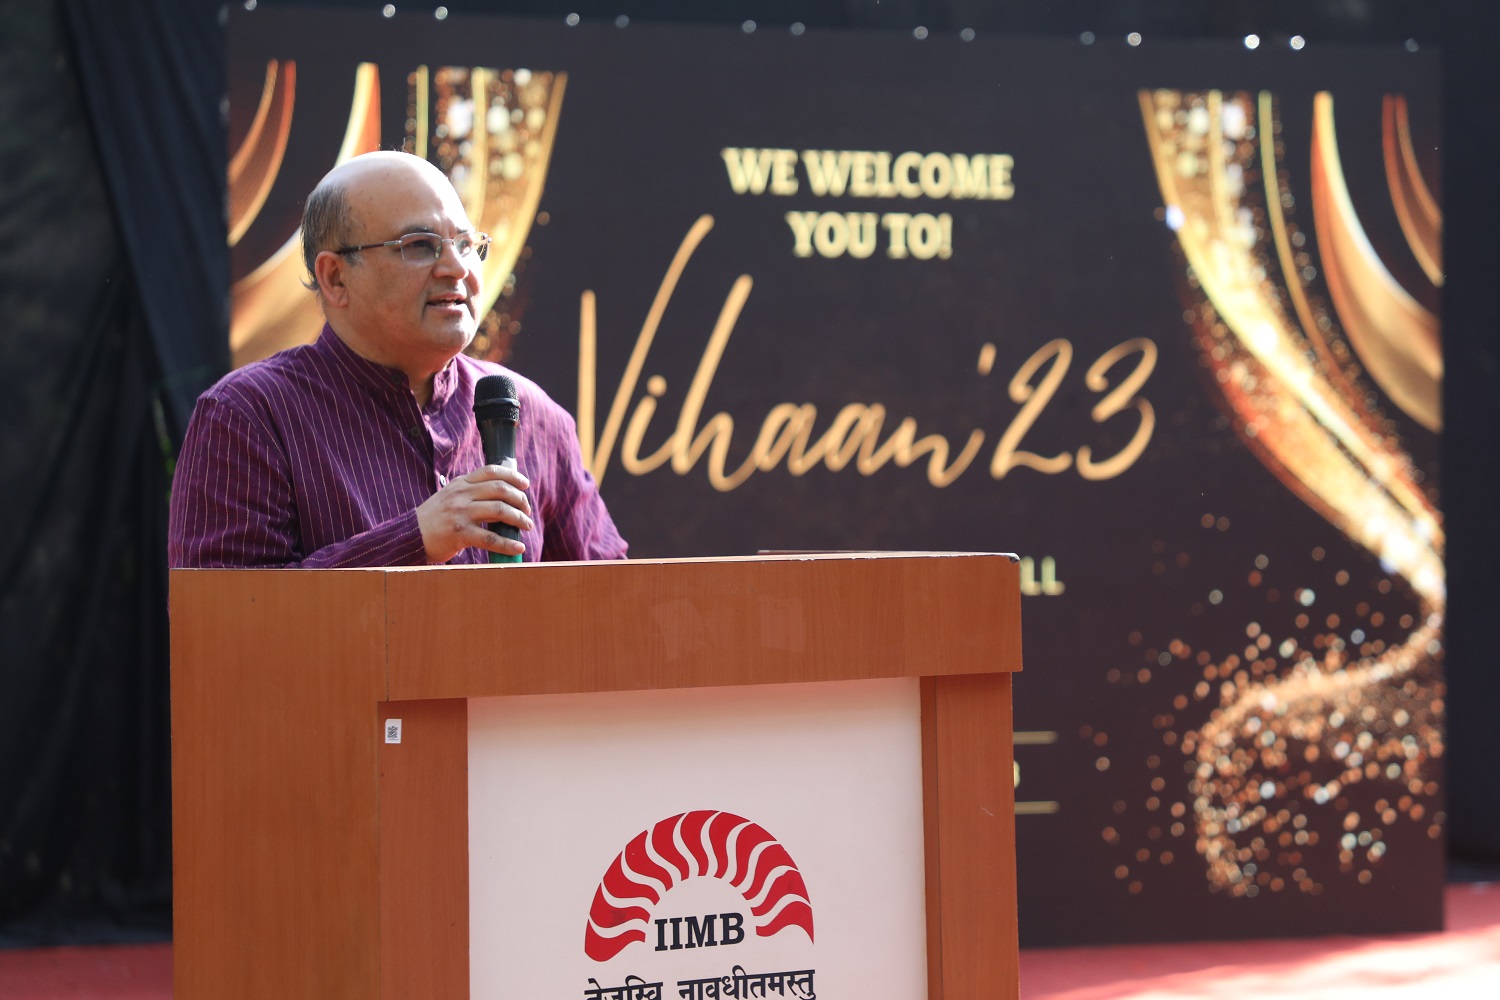 Prof. Rishikesha T Krishnan, Director, IIM Bangalore, congratulates the outgoing EPGP batch and wishes the students a successful career ahead, at Vihaan '23, on 5th March 2023.